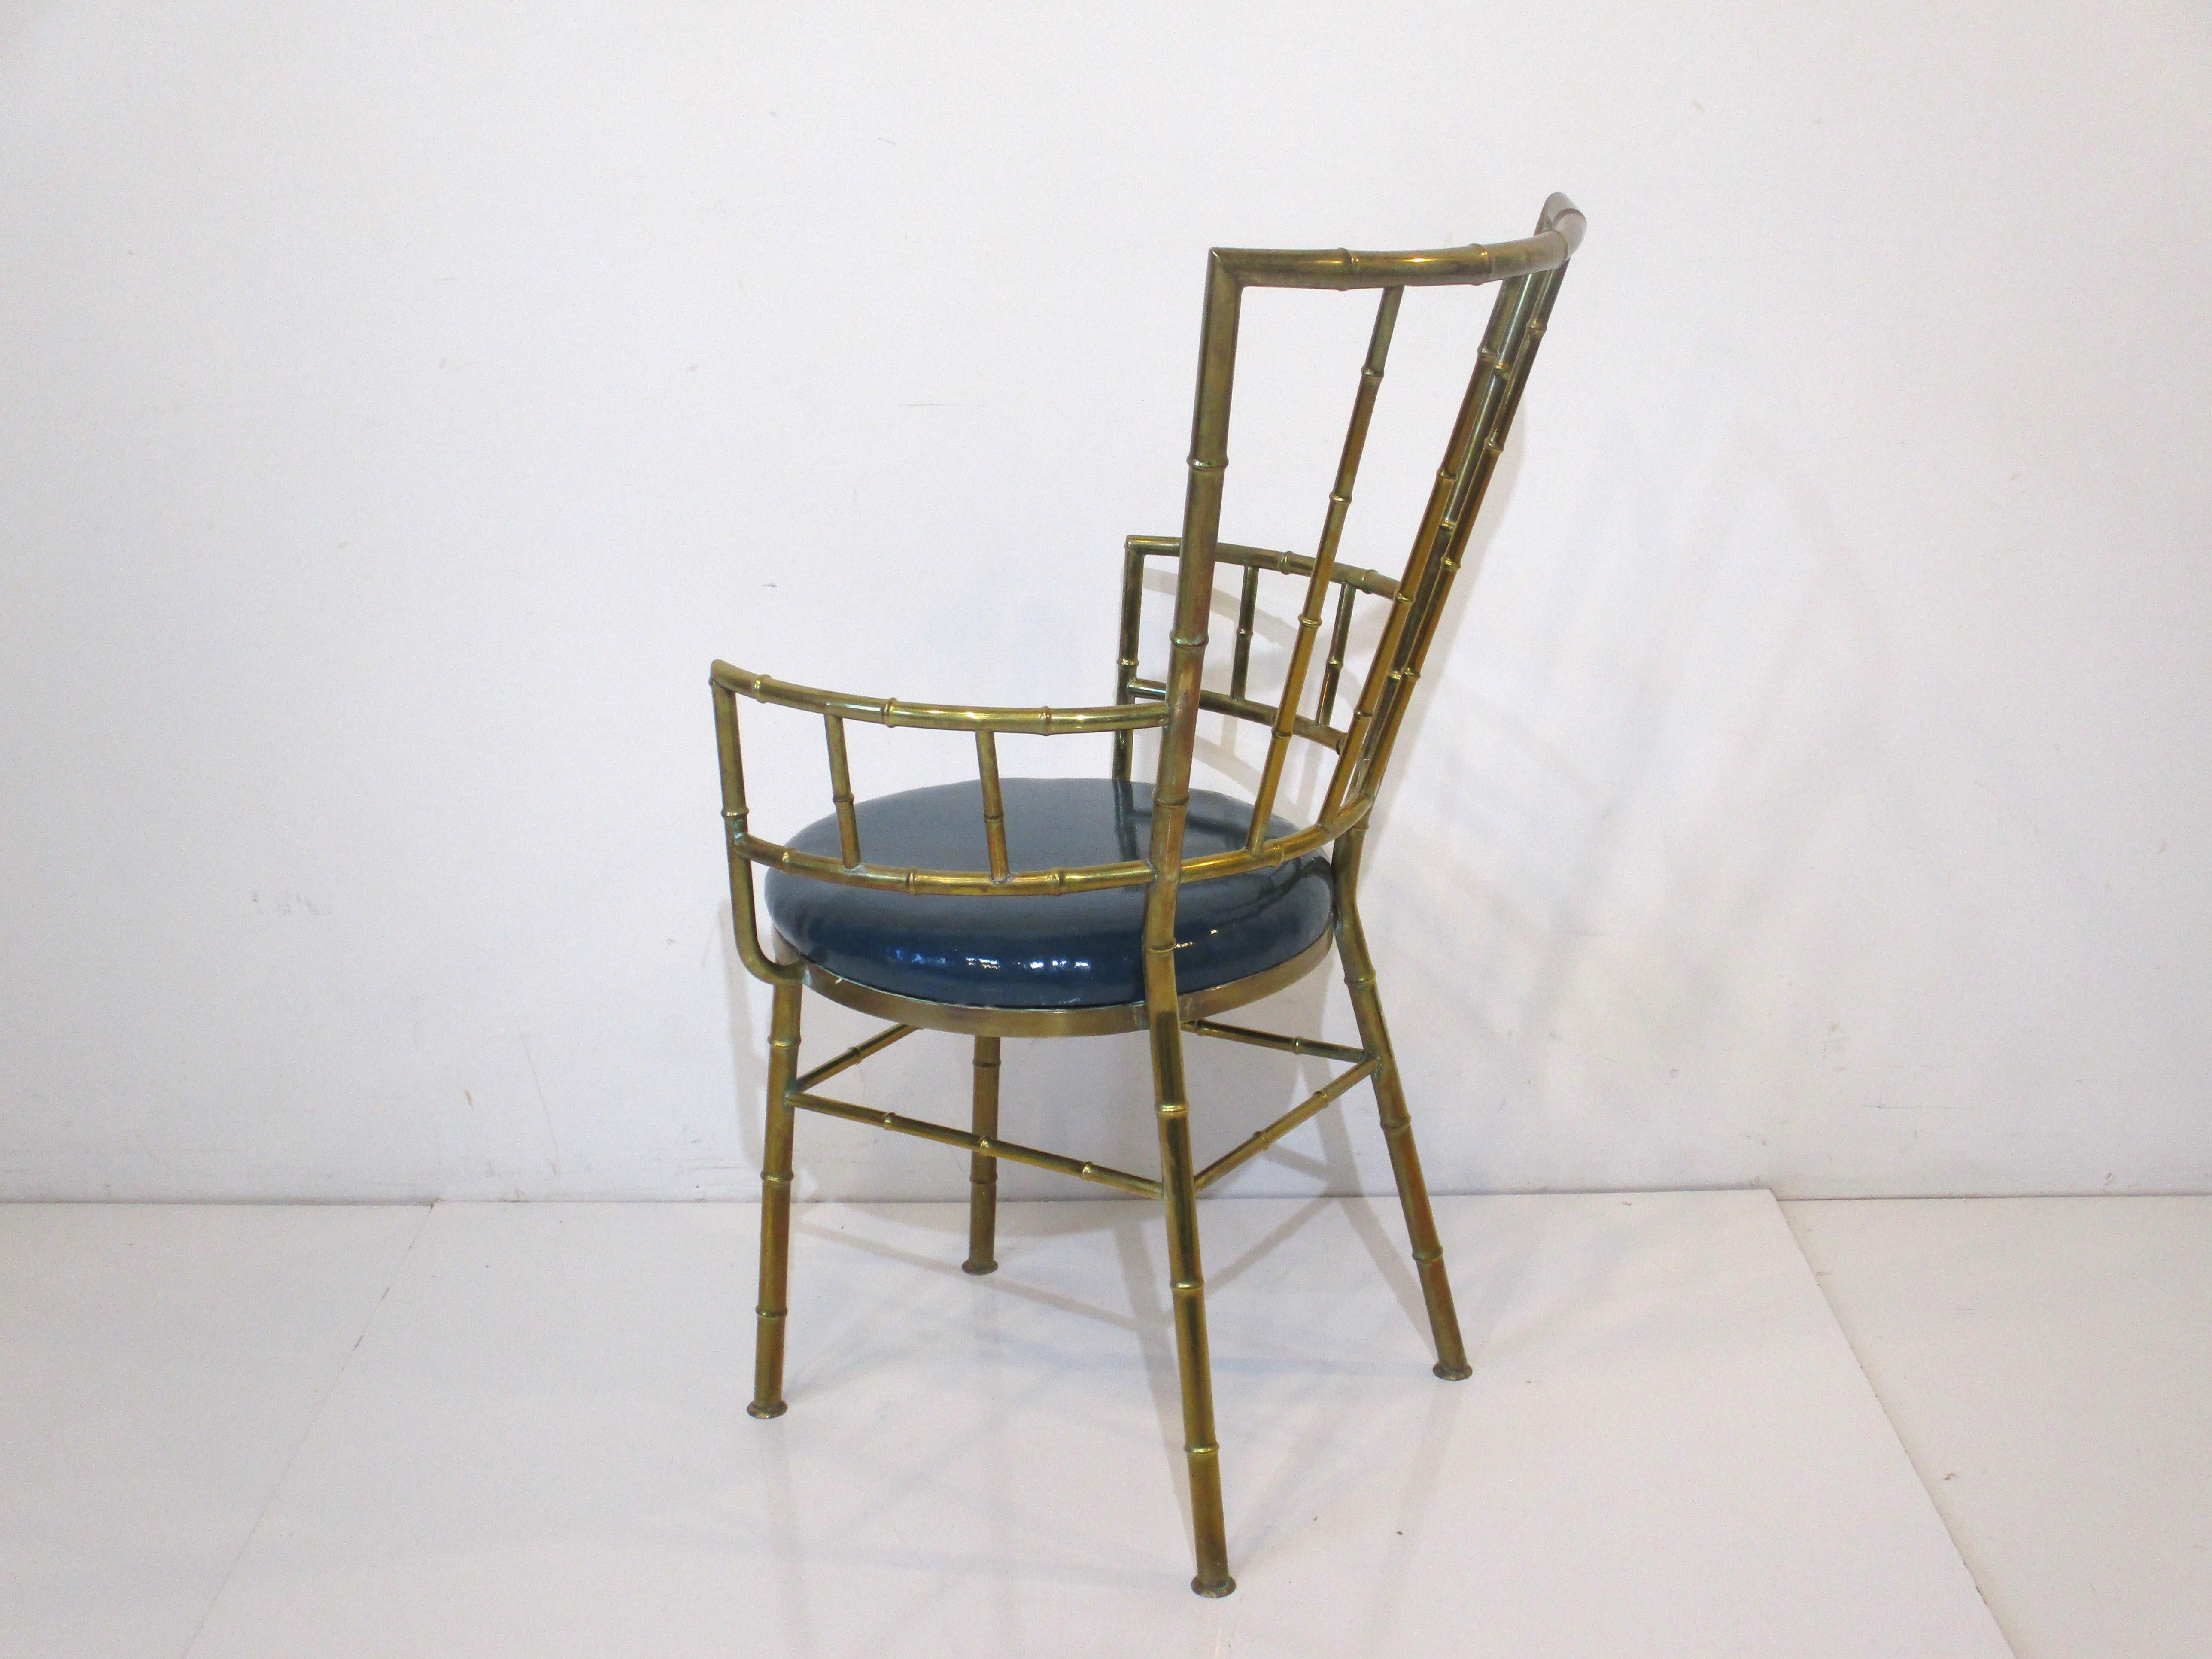 20th Century Italian Brass Faux Bamboo Styled Chiavari Arm Chair For Sale